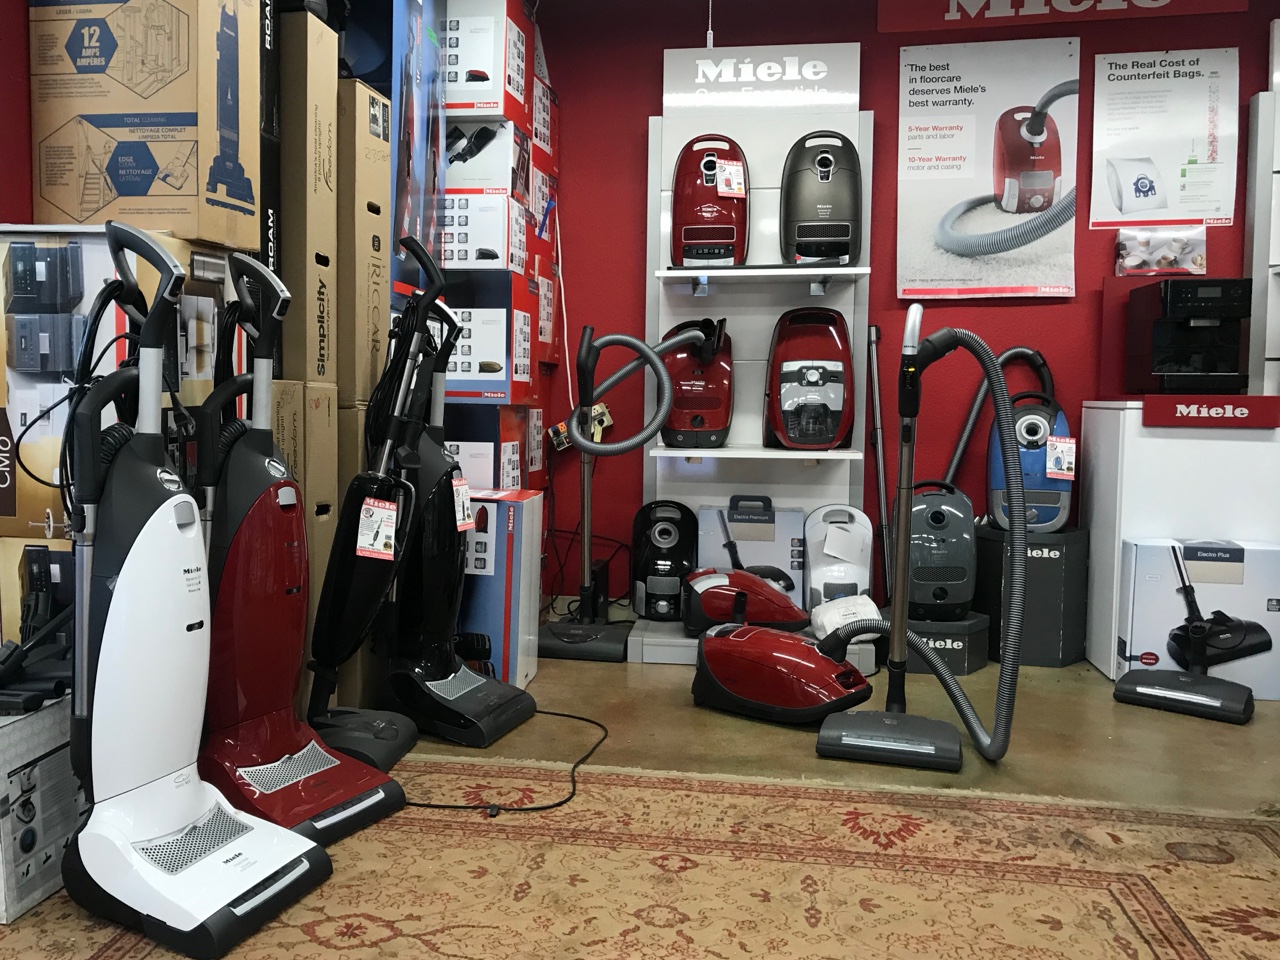 More Than Vacuums Denver locations showroom showing Miele upright and canister vacuums